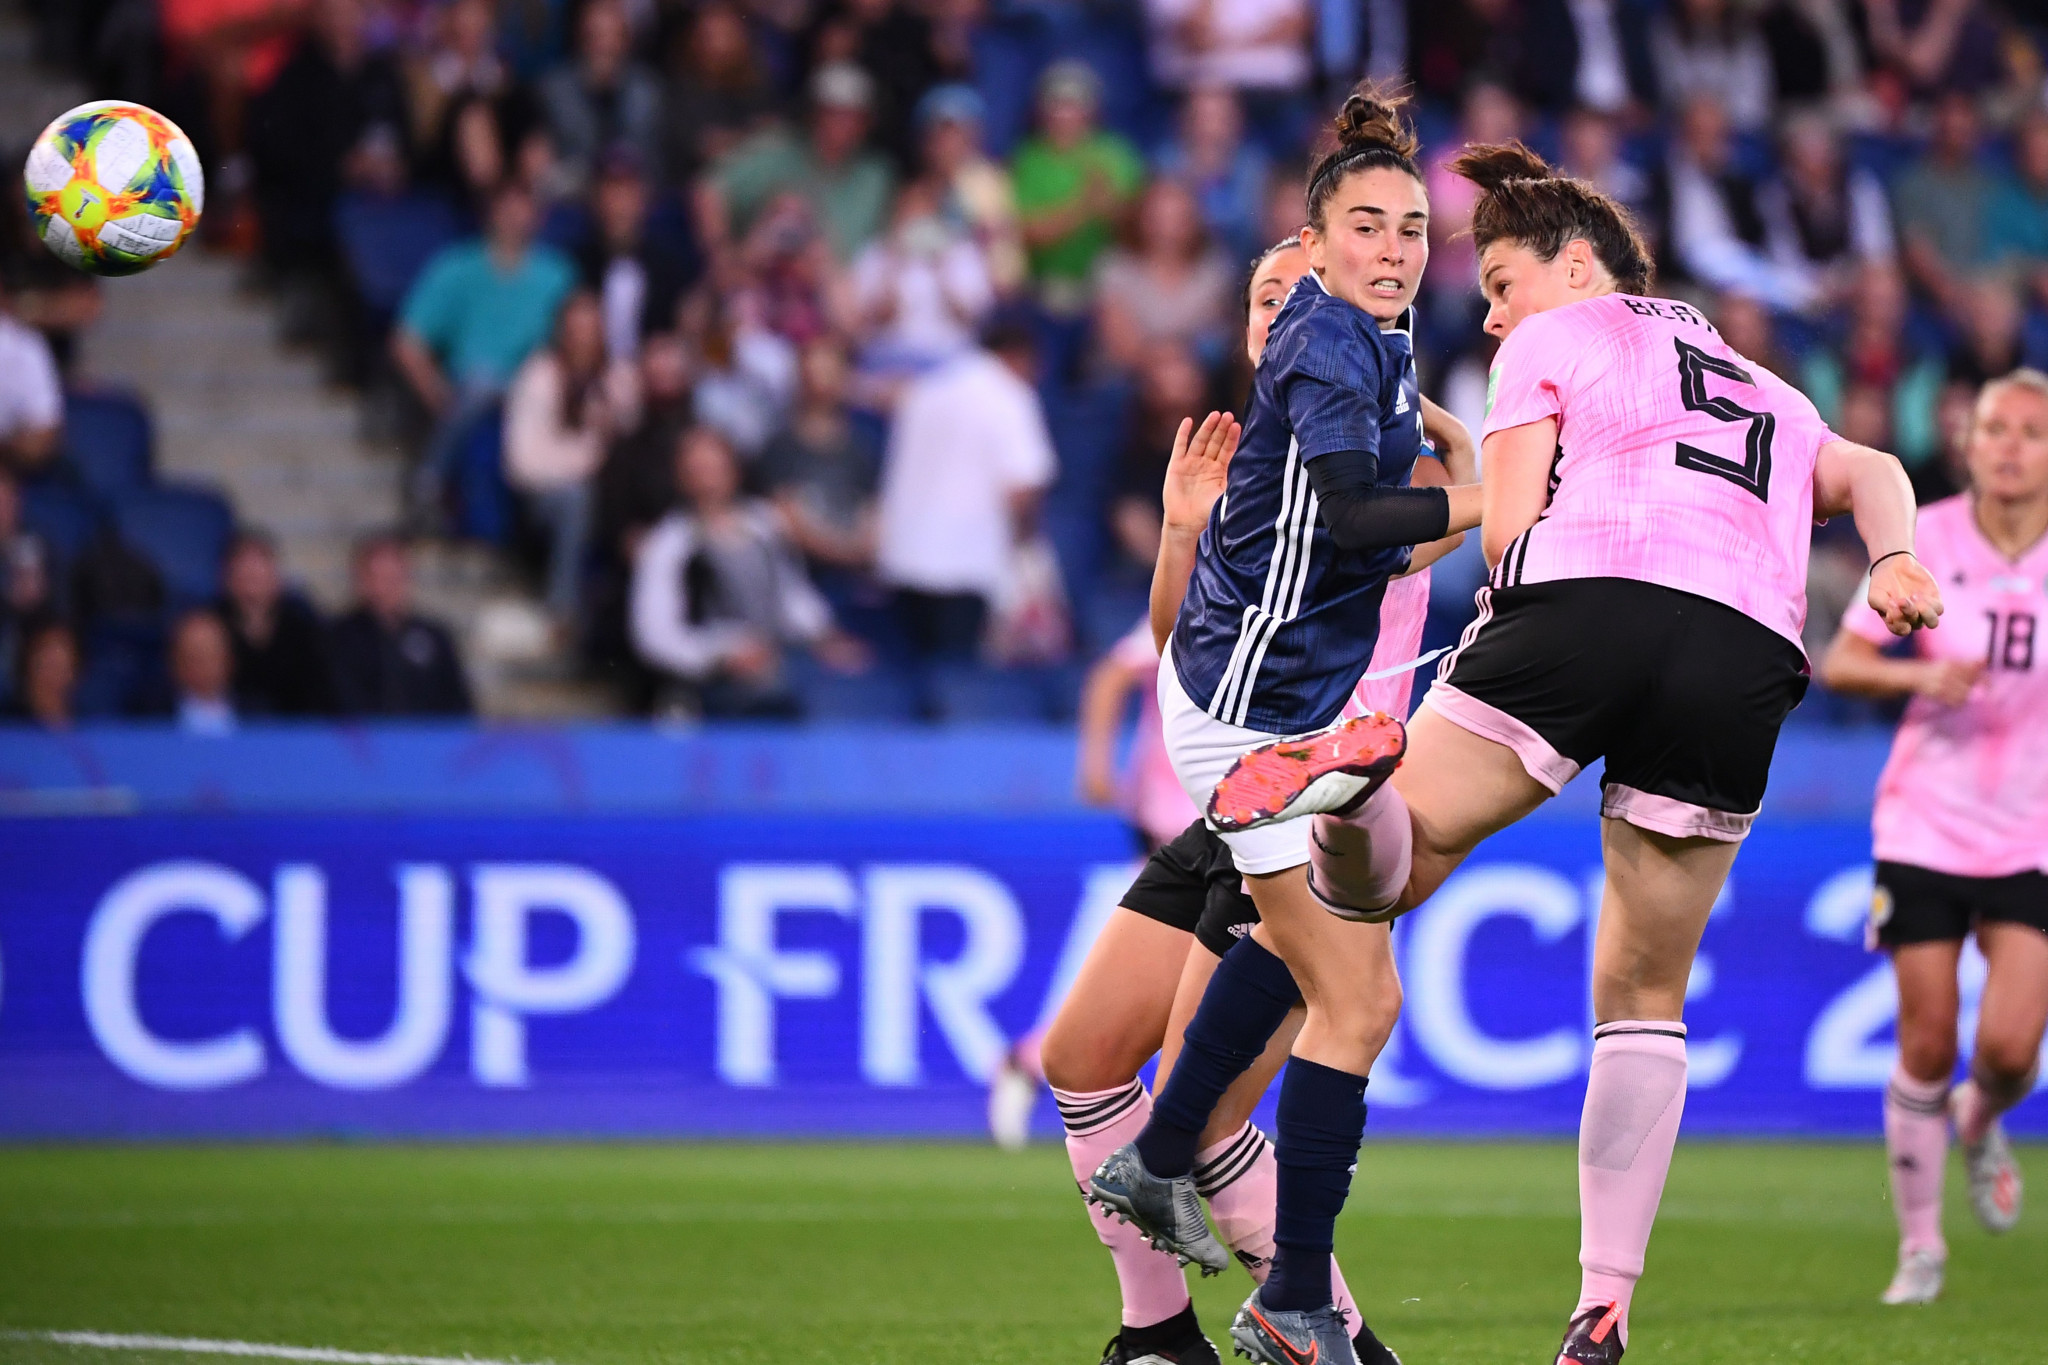 Jennifer Beattie made it 2-0 in the 49th minute ©Getty Images